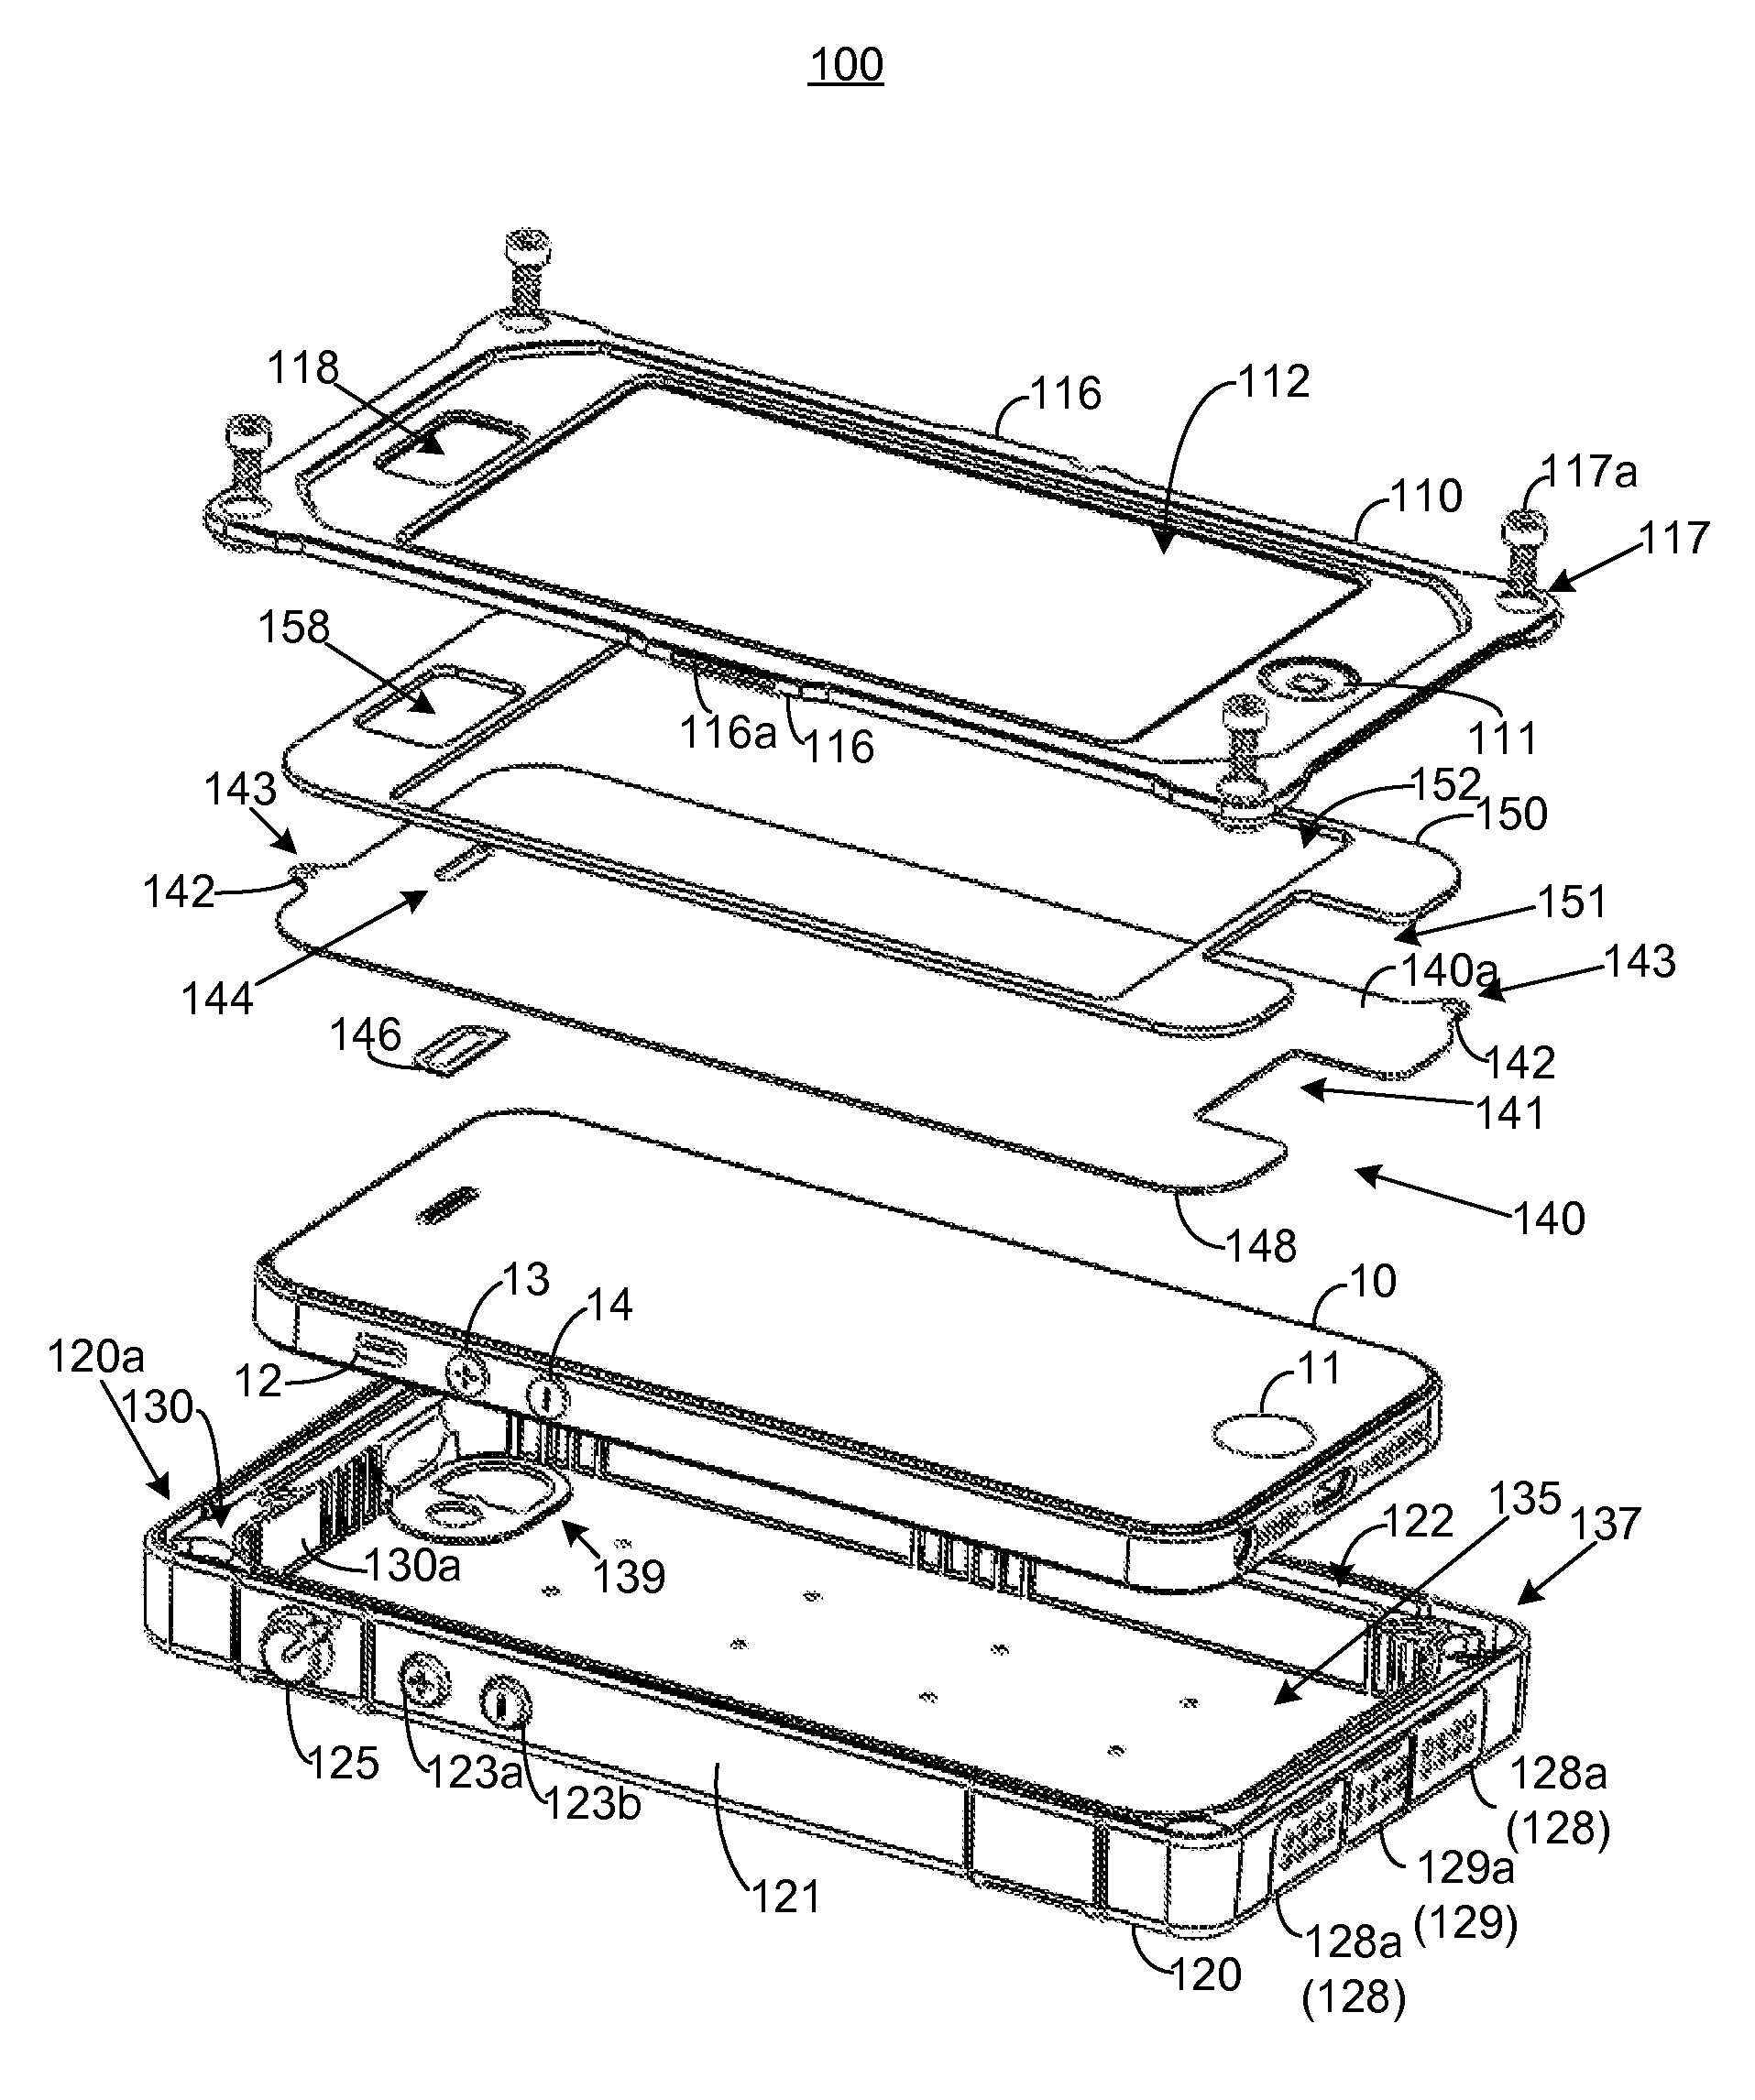 Protective cases for mobile electronic communication devices